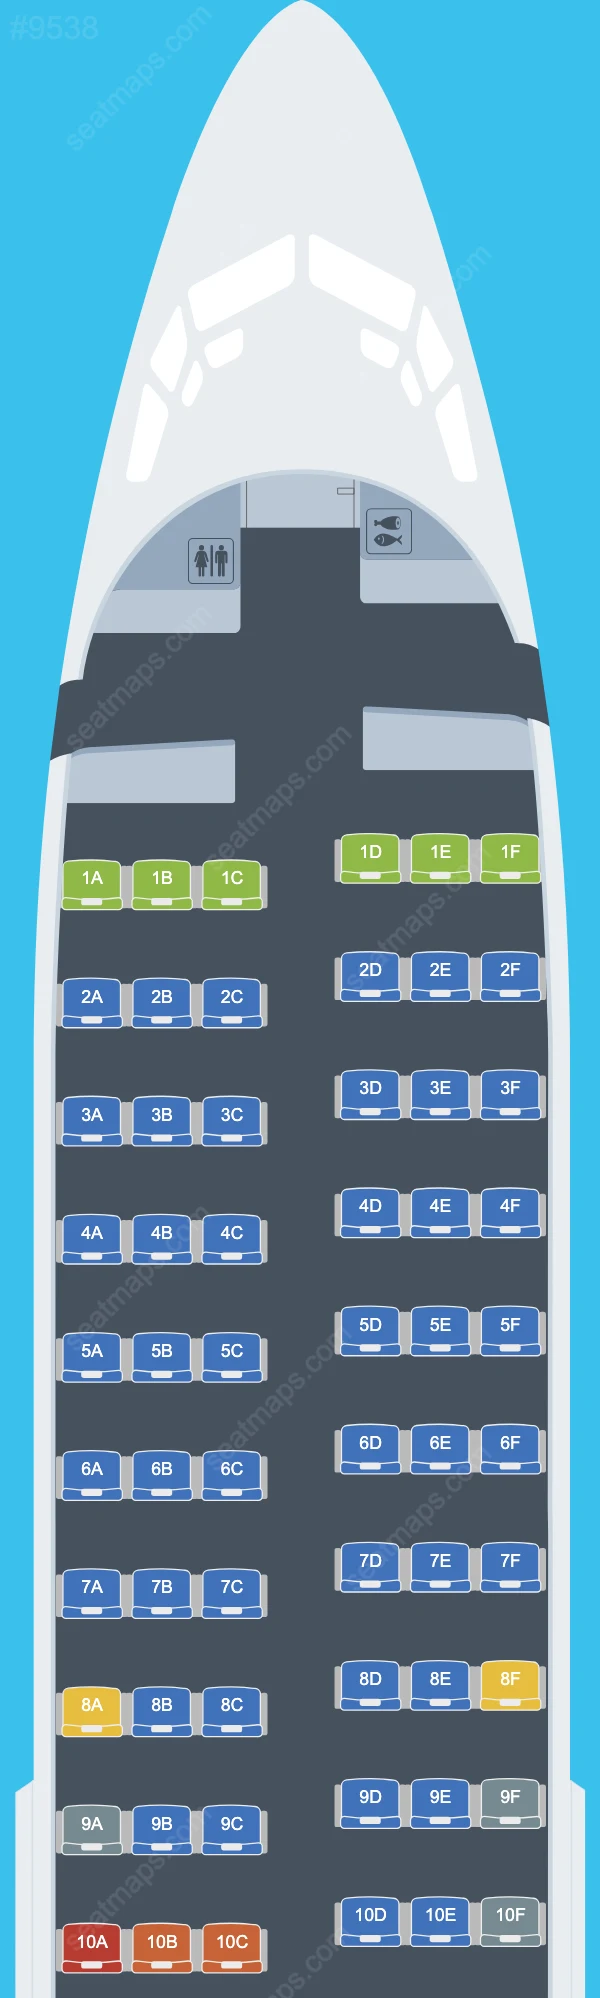 UR Airlines Boeing 737 Seat Maps 737-300